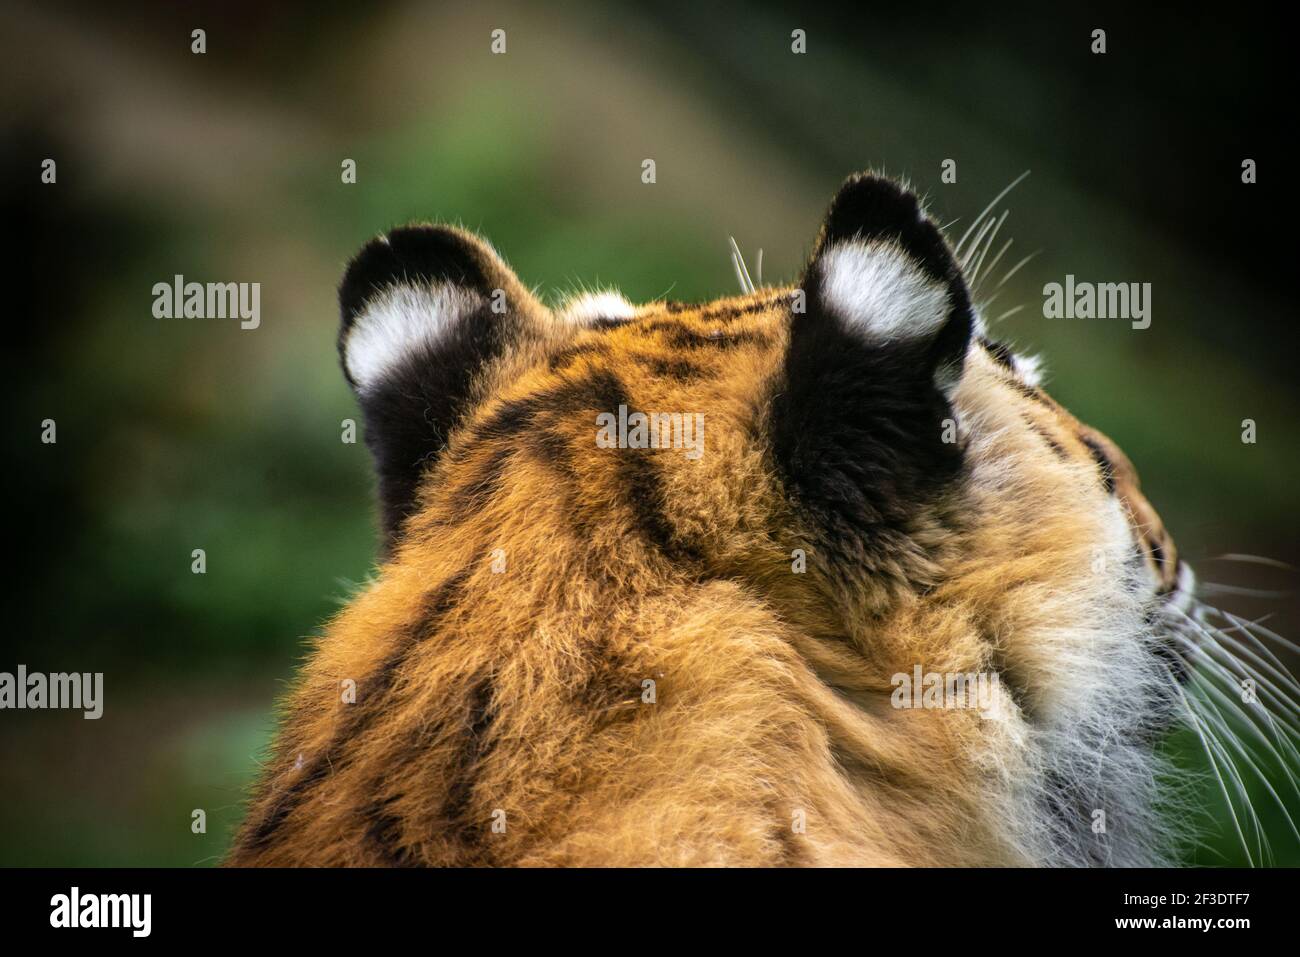 Close up, Zoomed in shot of back of the head of a Bengal Tiger. Stock Photo